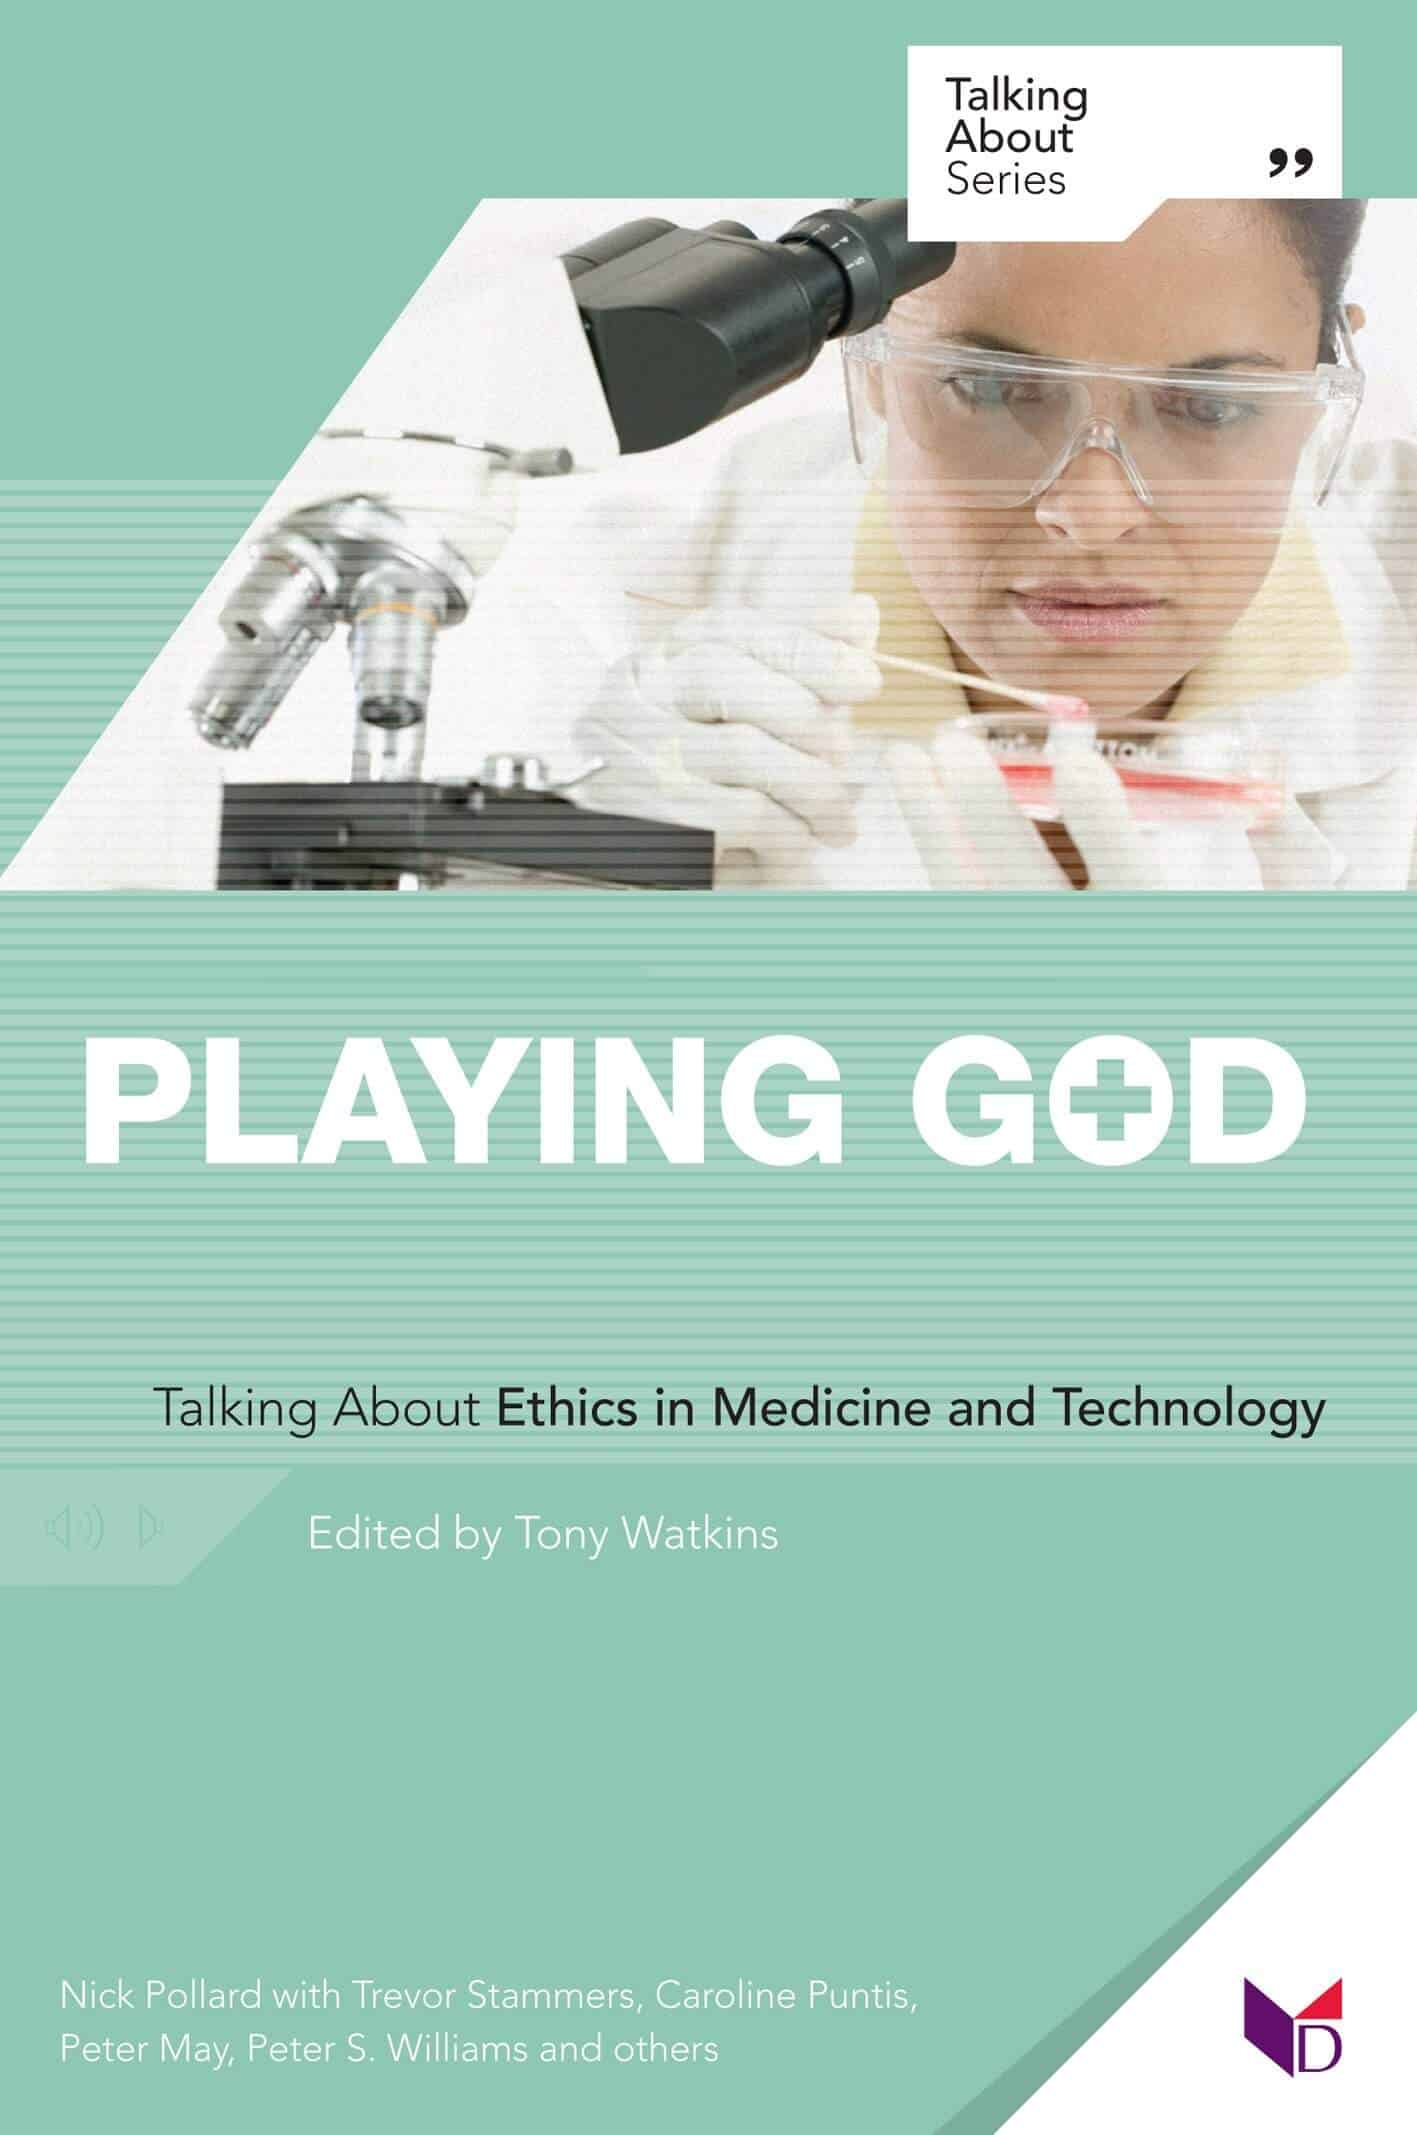 Playing God: Talking About Ethics in Medicine and Technology (Damaris Books, 2006)